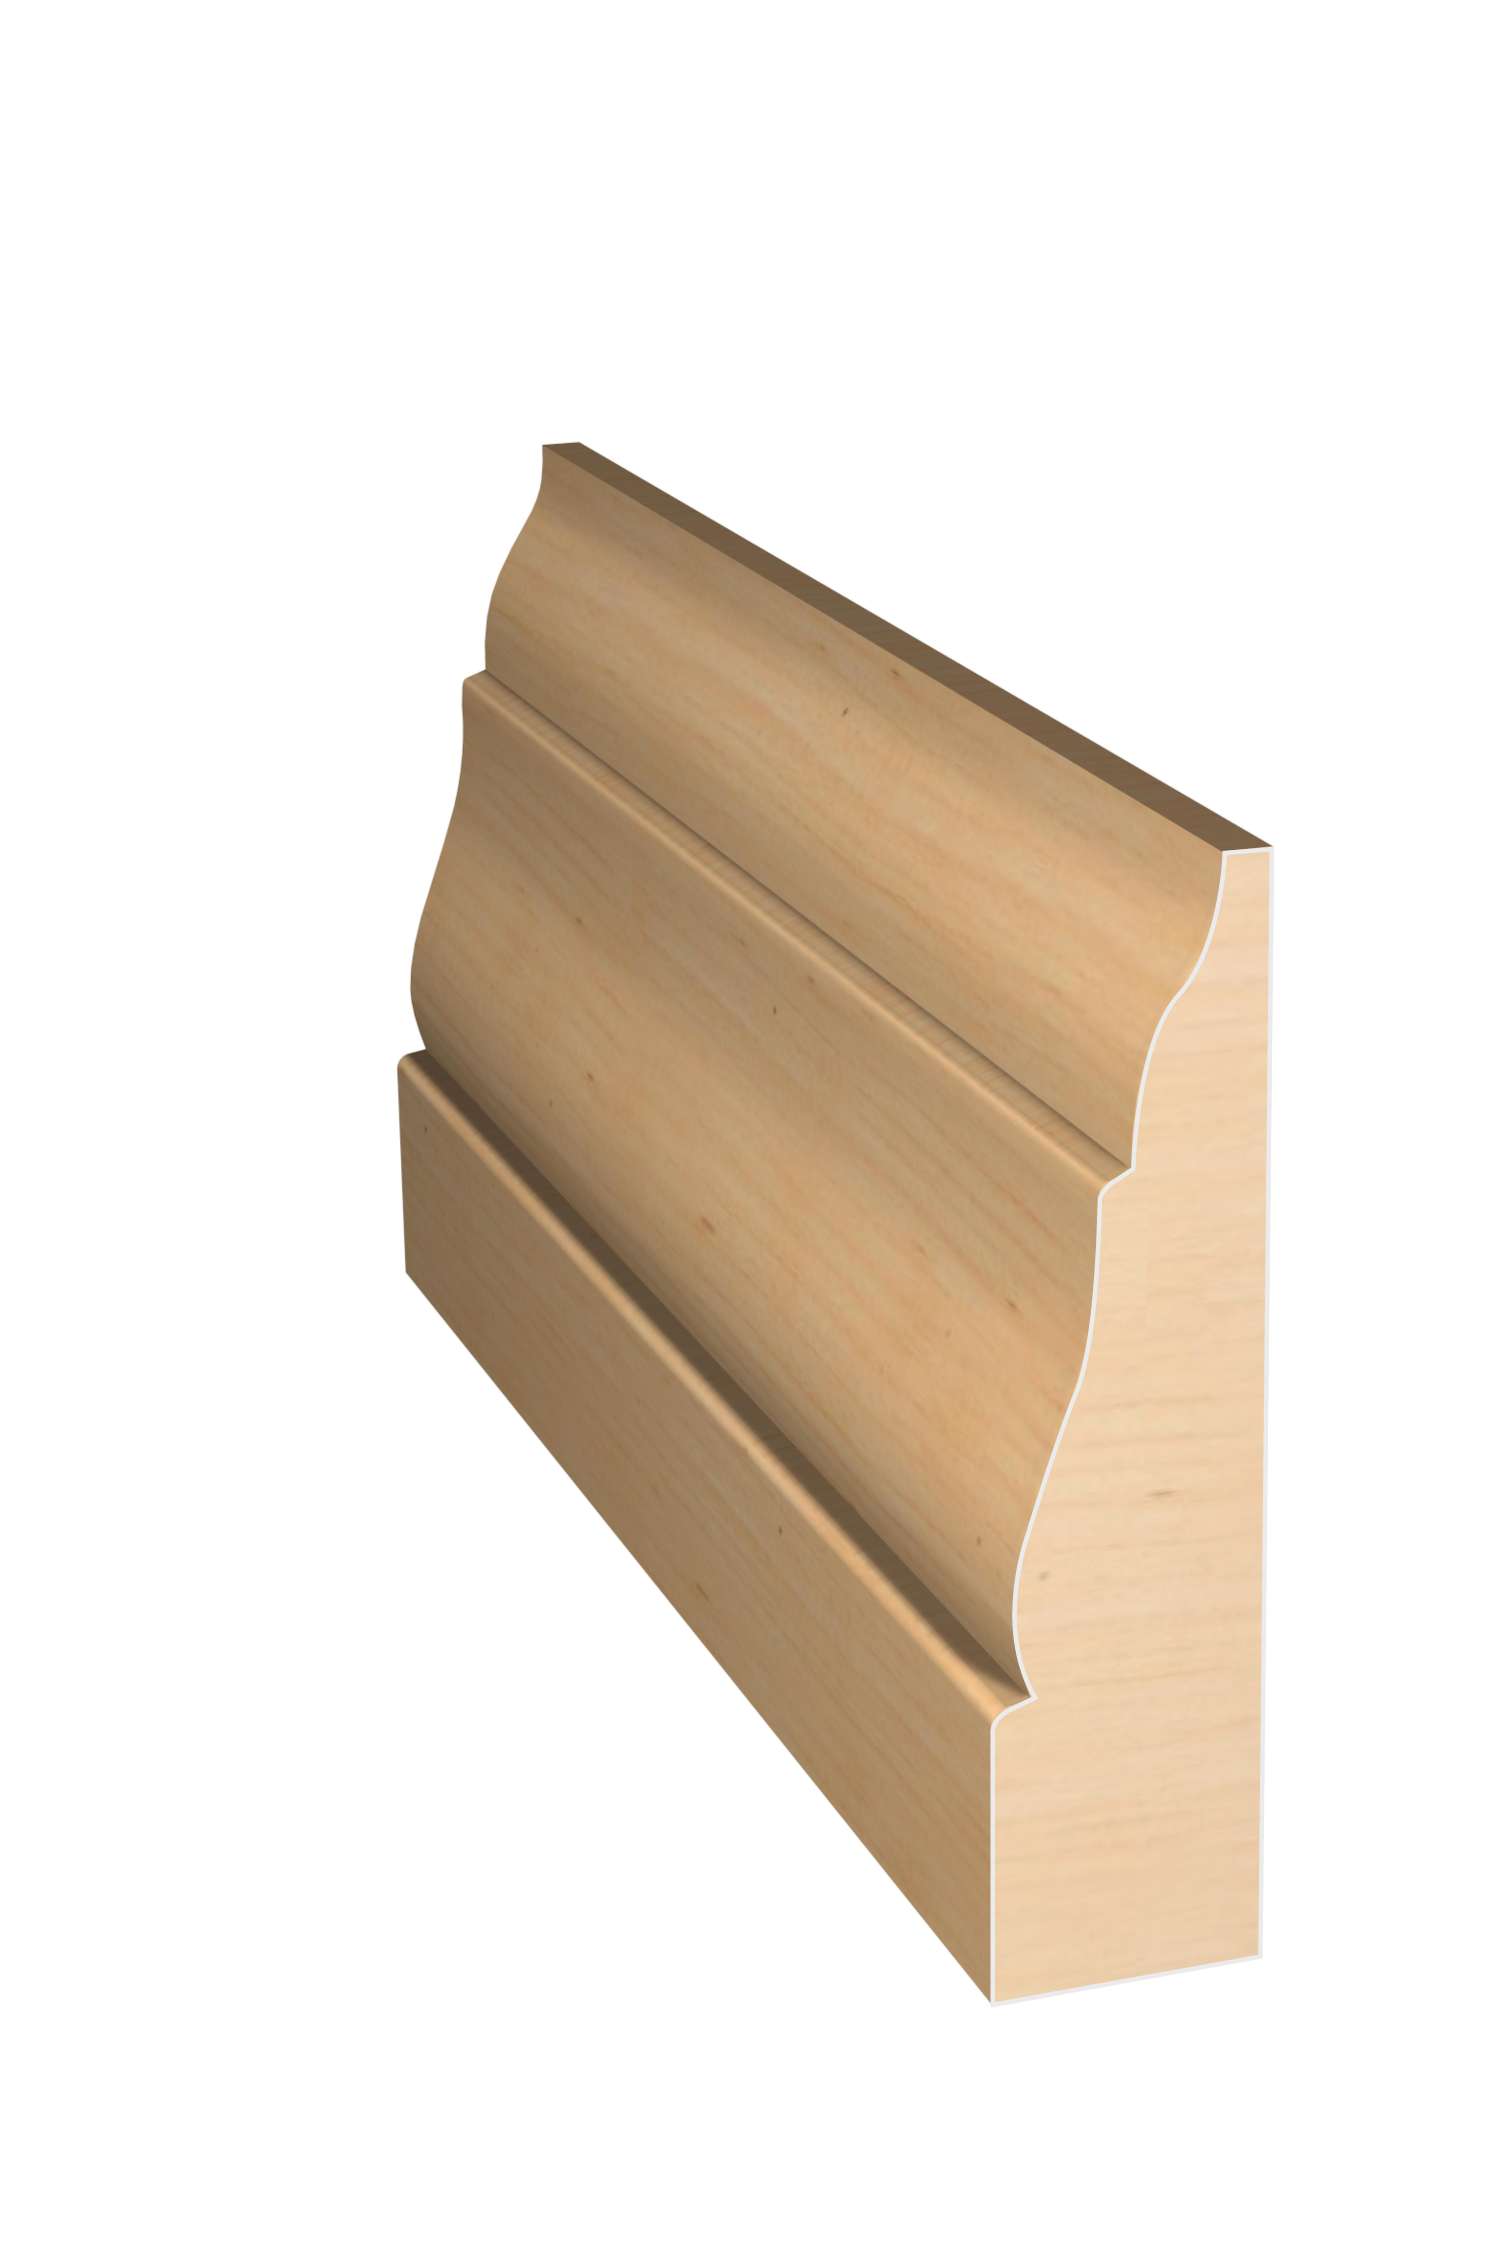 Three dimensional rendering of custom casing wood molding CAPL314 made by Public Lumber Company in Detroit.